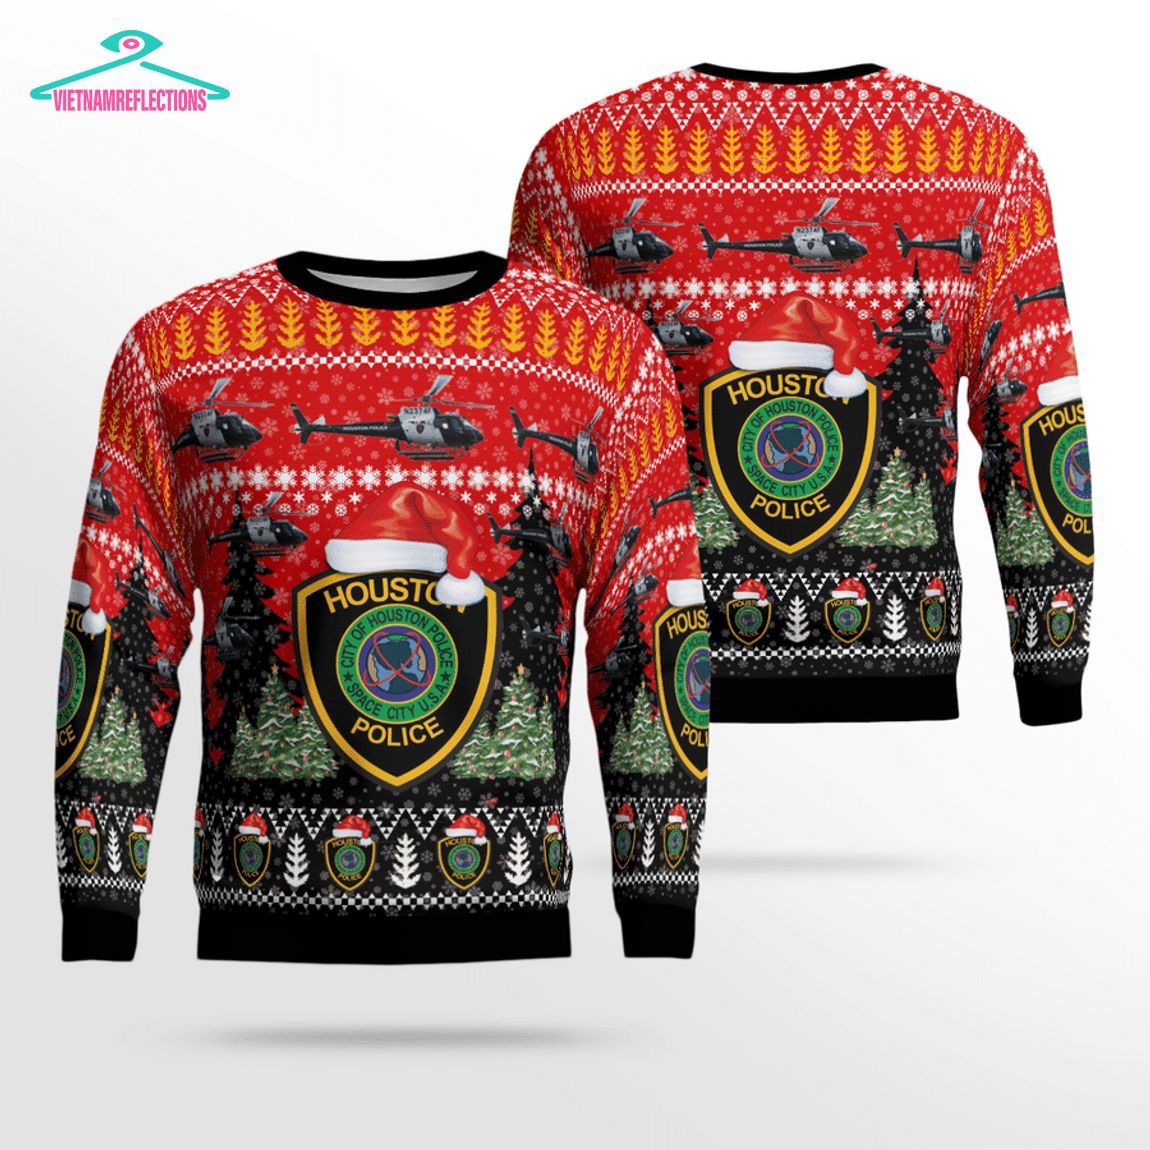 texas-houston-police-department-h125-helicopter-3d-christmas-sweater-1-4pbAq.jpg